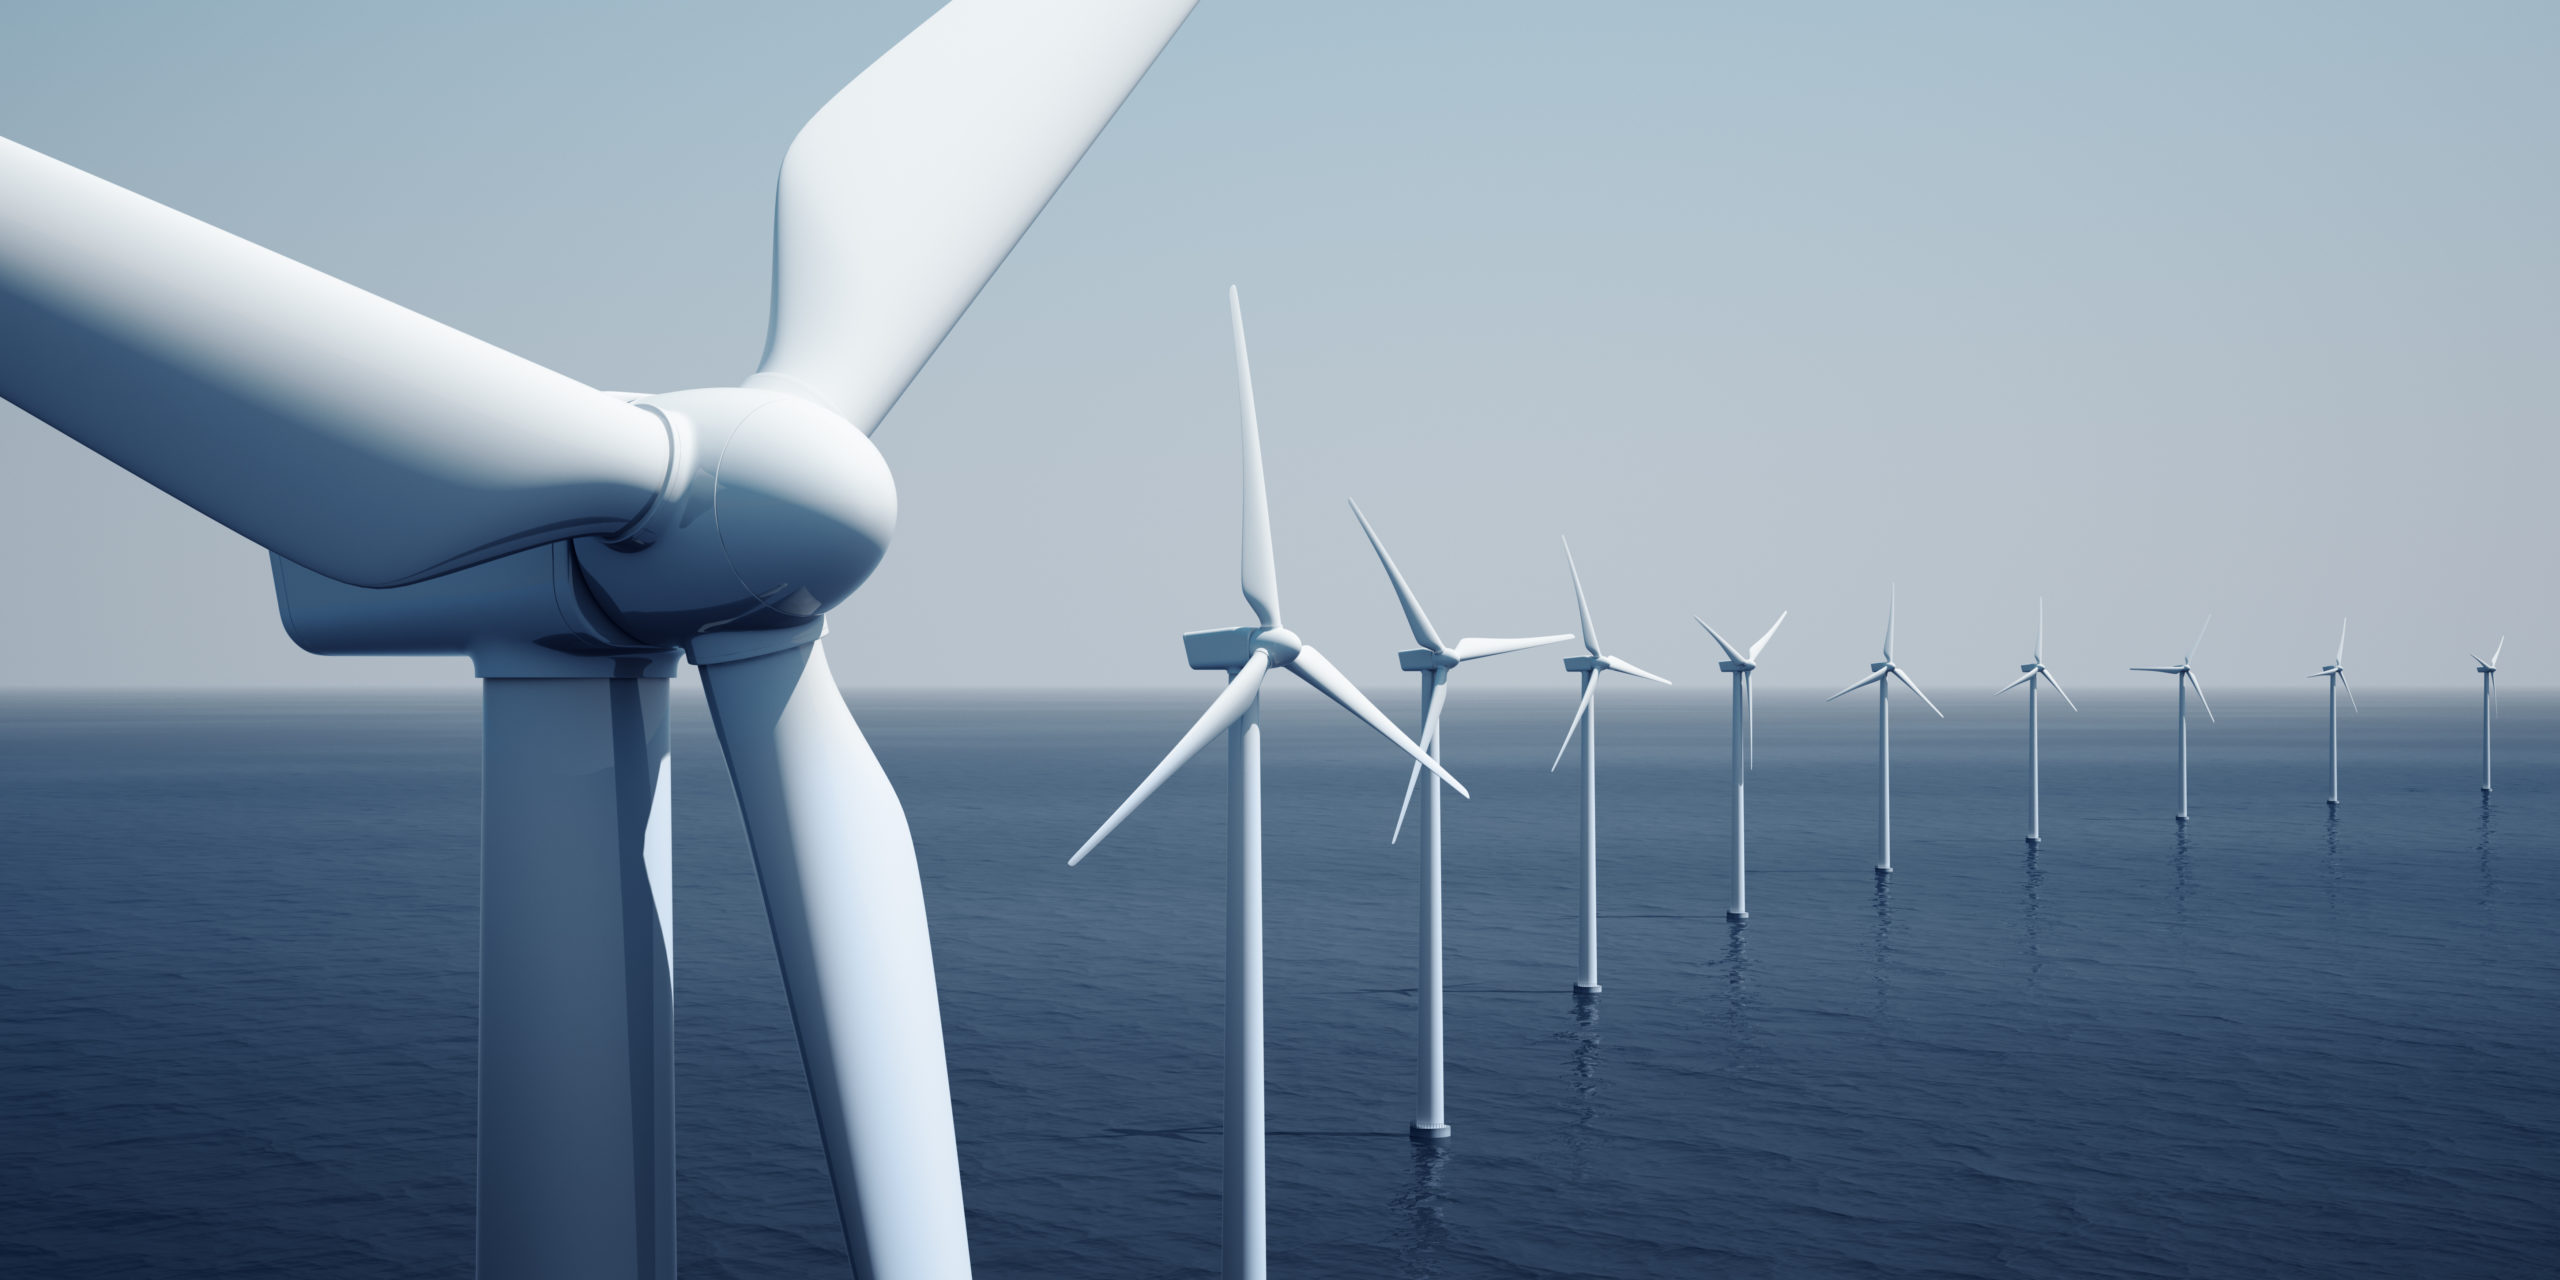 Offshore wind opportunity soars with 135 GW of potential capacity available in leasing rounds